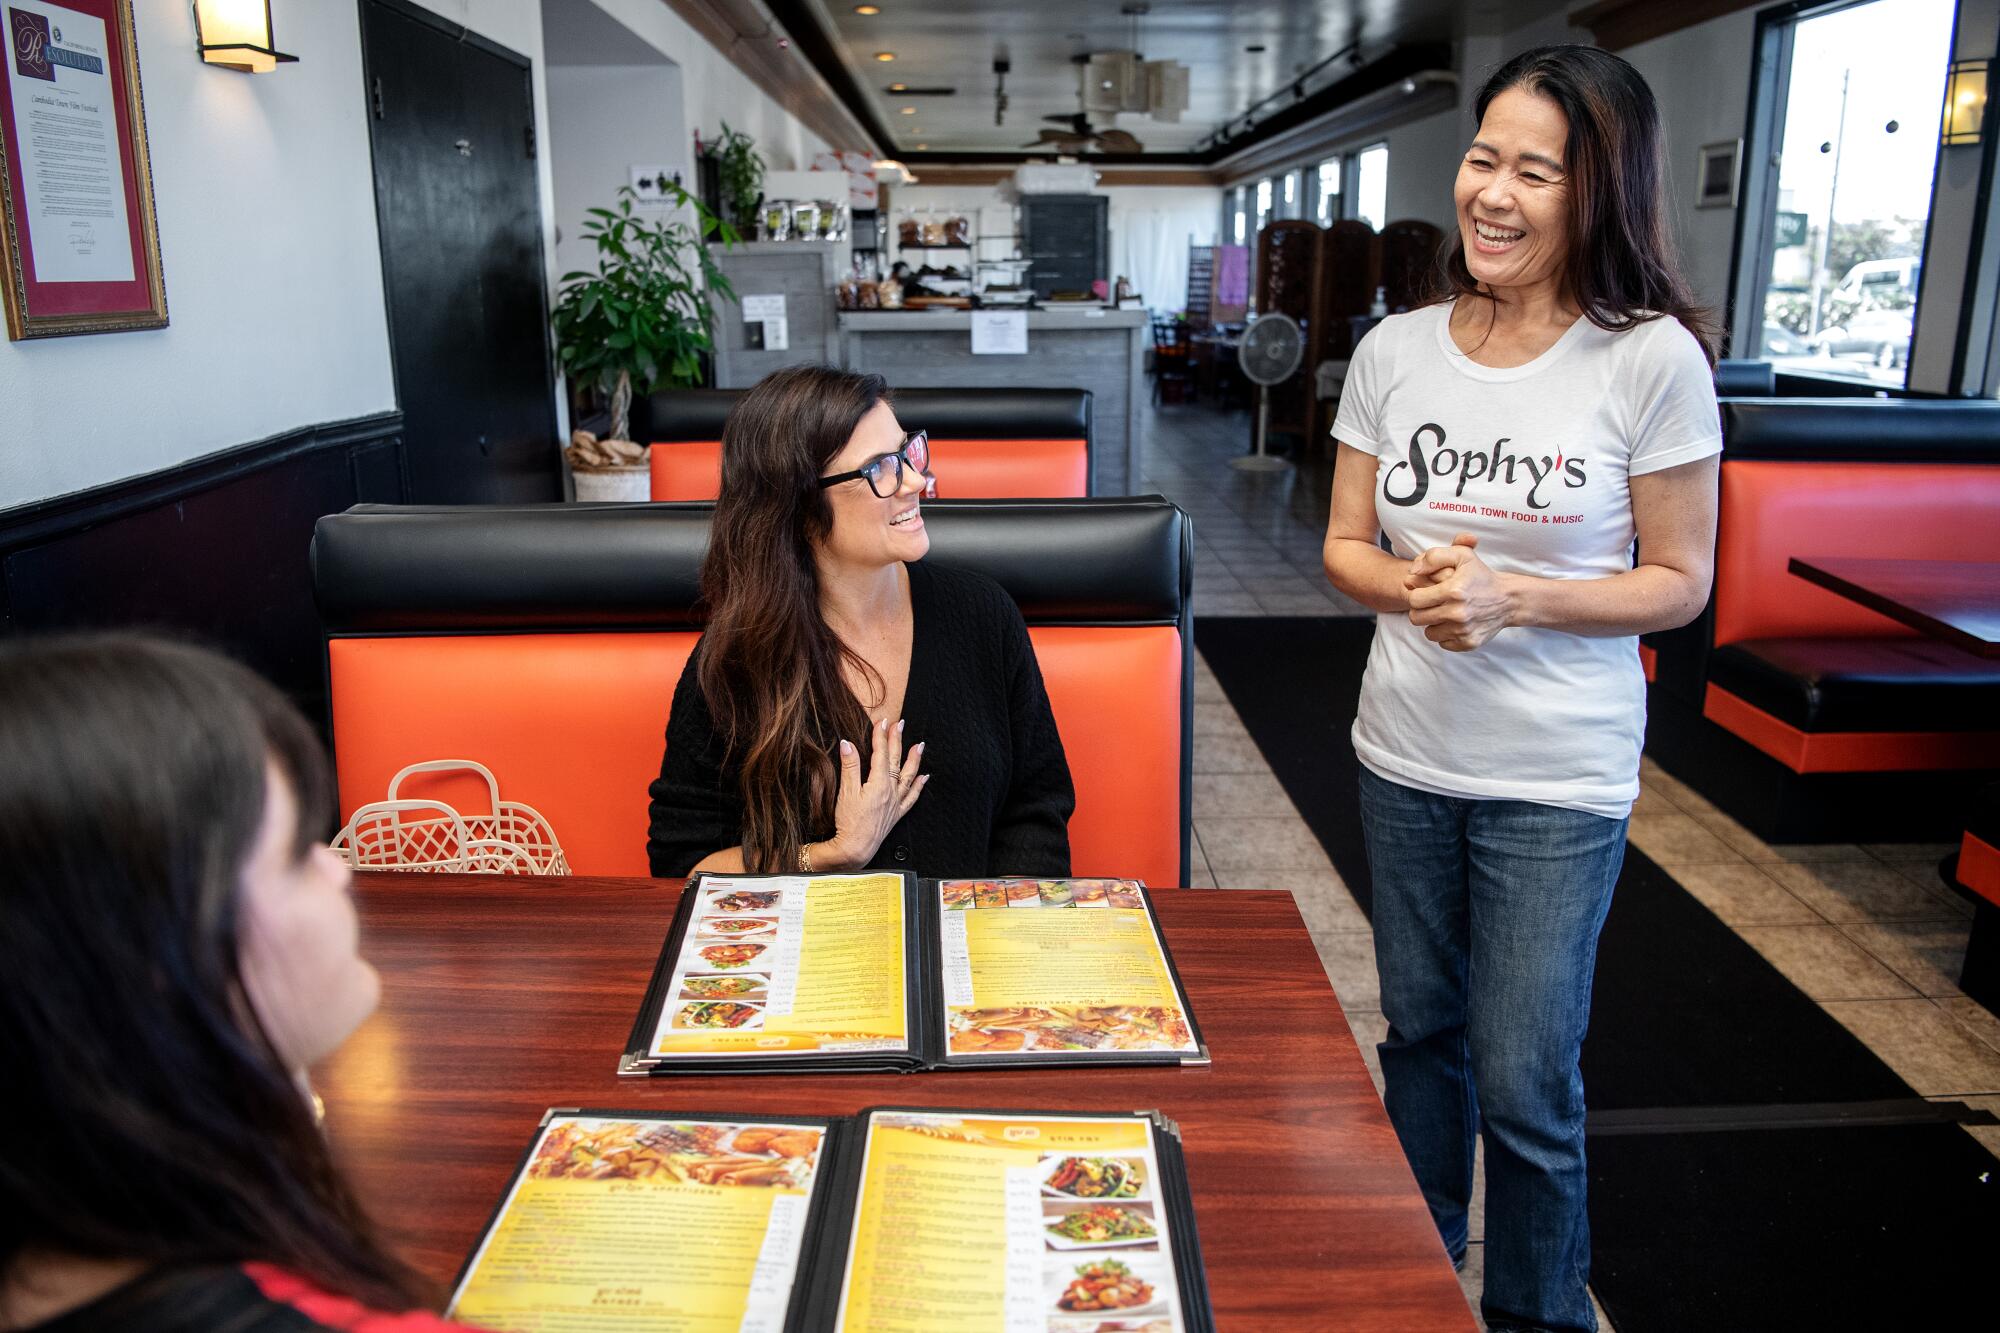 Tiffani Thiessen, left, and Sophy Khut at Sophy's: Cambodia Town Food in Long Beach.